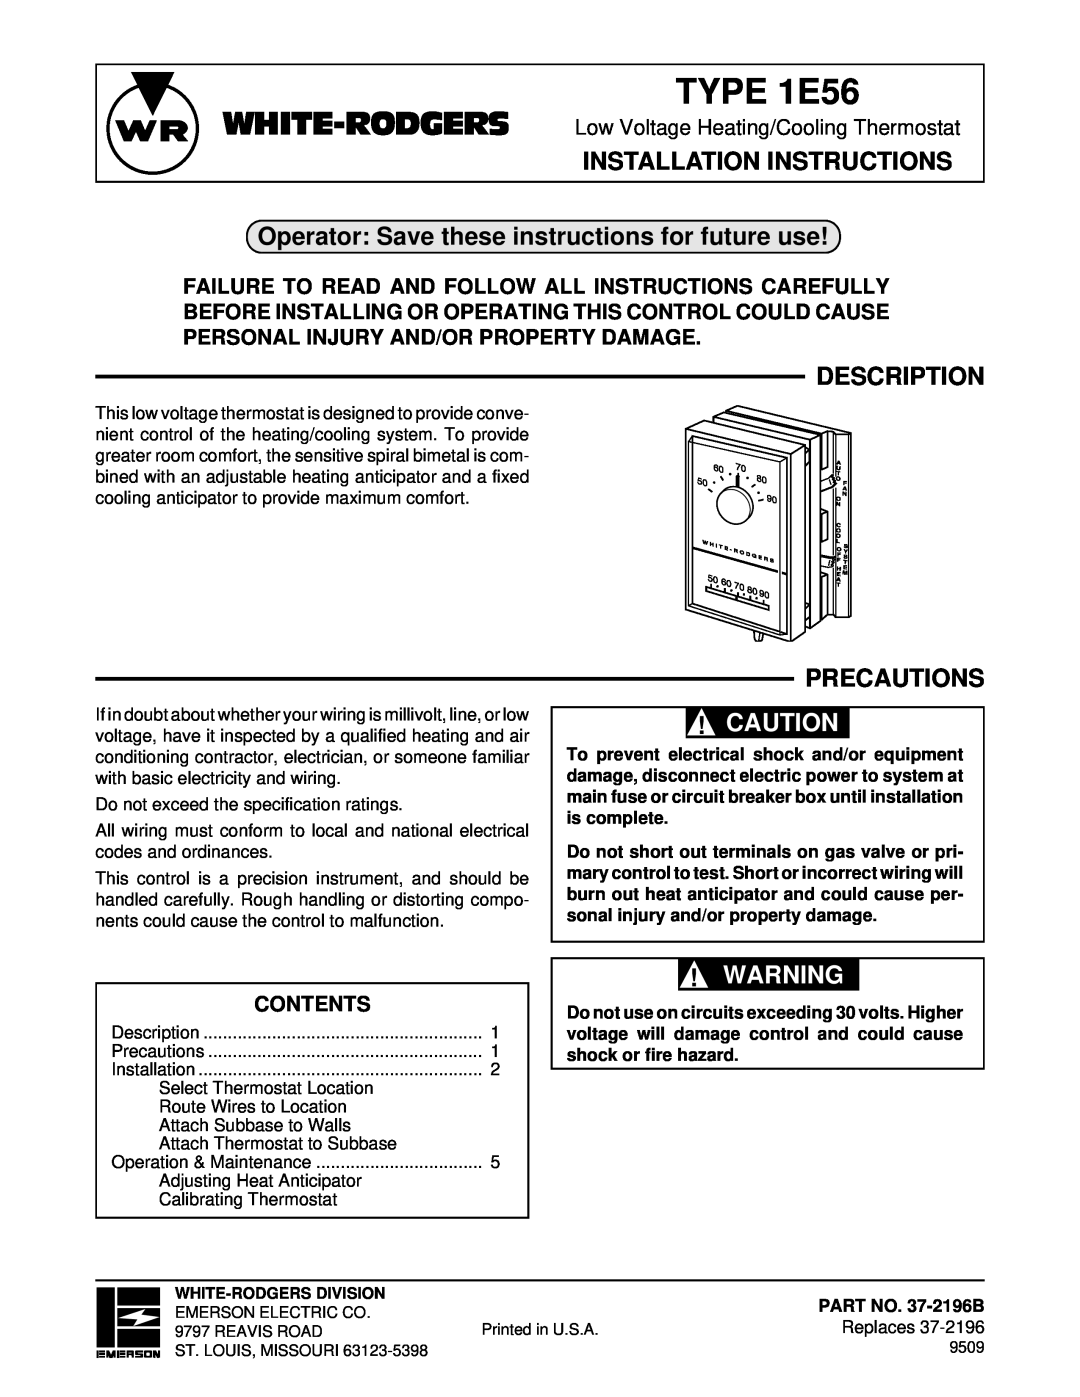 White Rodgers 1.00E+56 installation instructions Installation Instructions, Description, Precautions, Contents, TYPE 1E56 